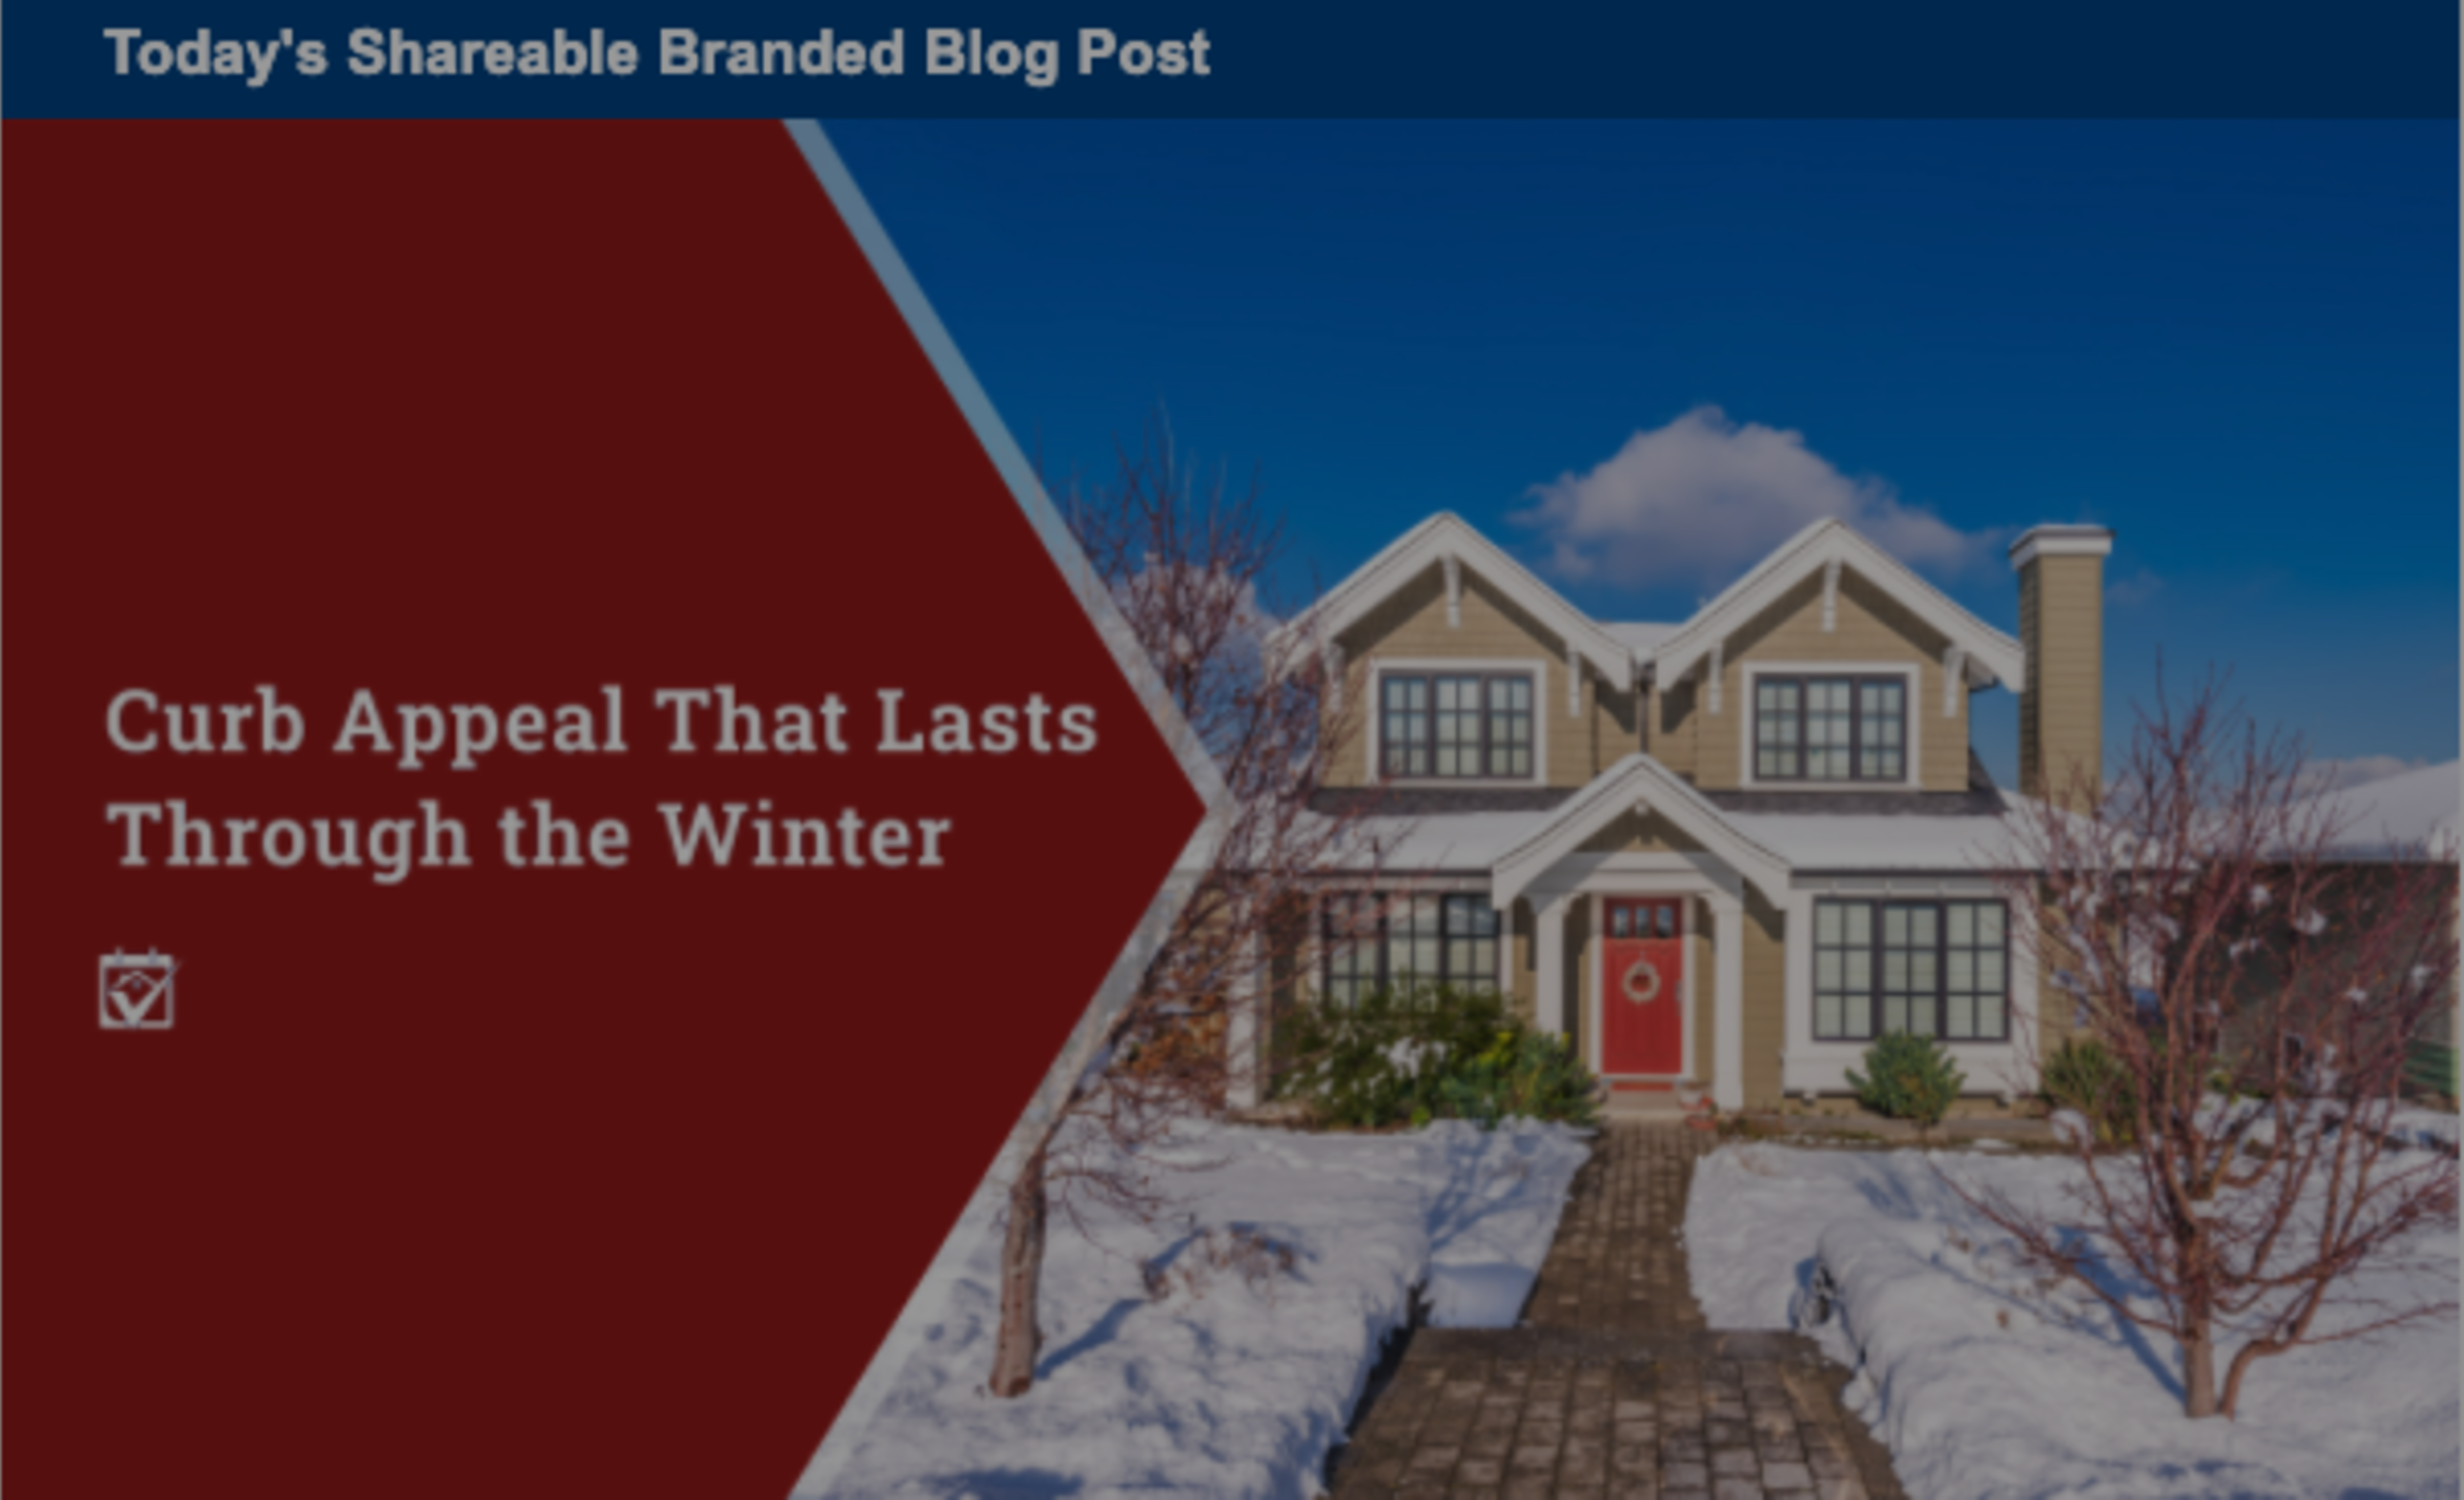 Curb Appeal That Lasts Through the Winter